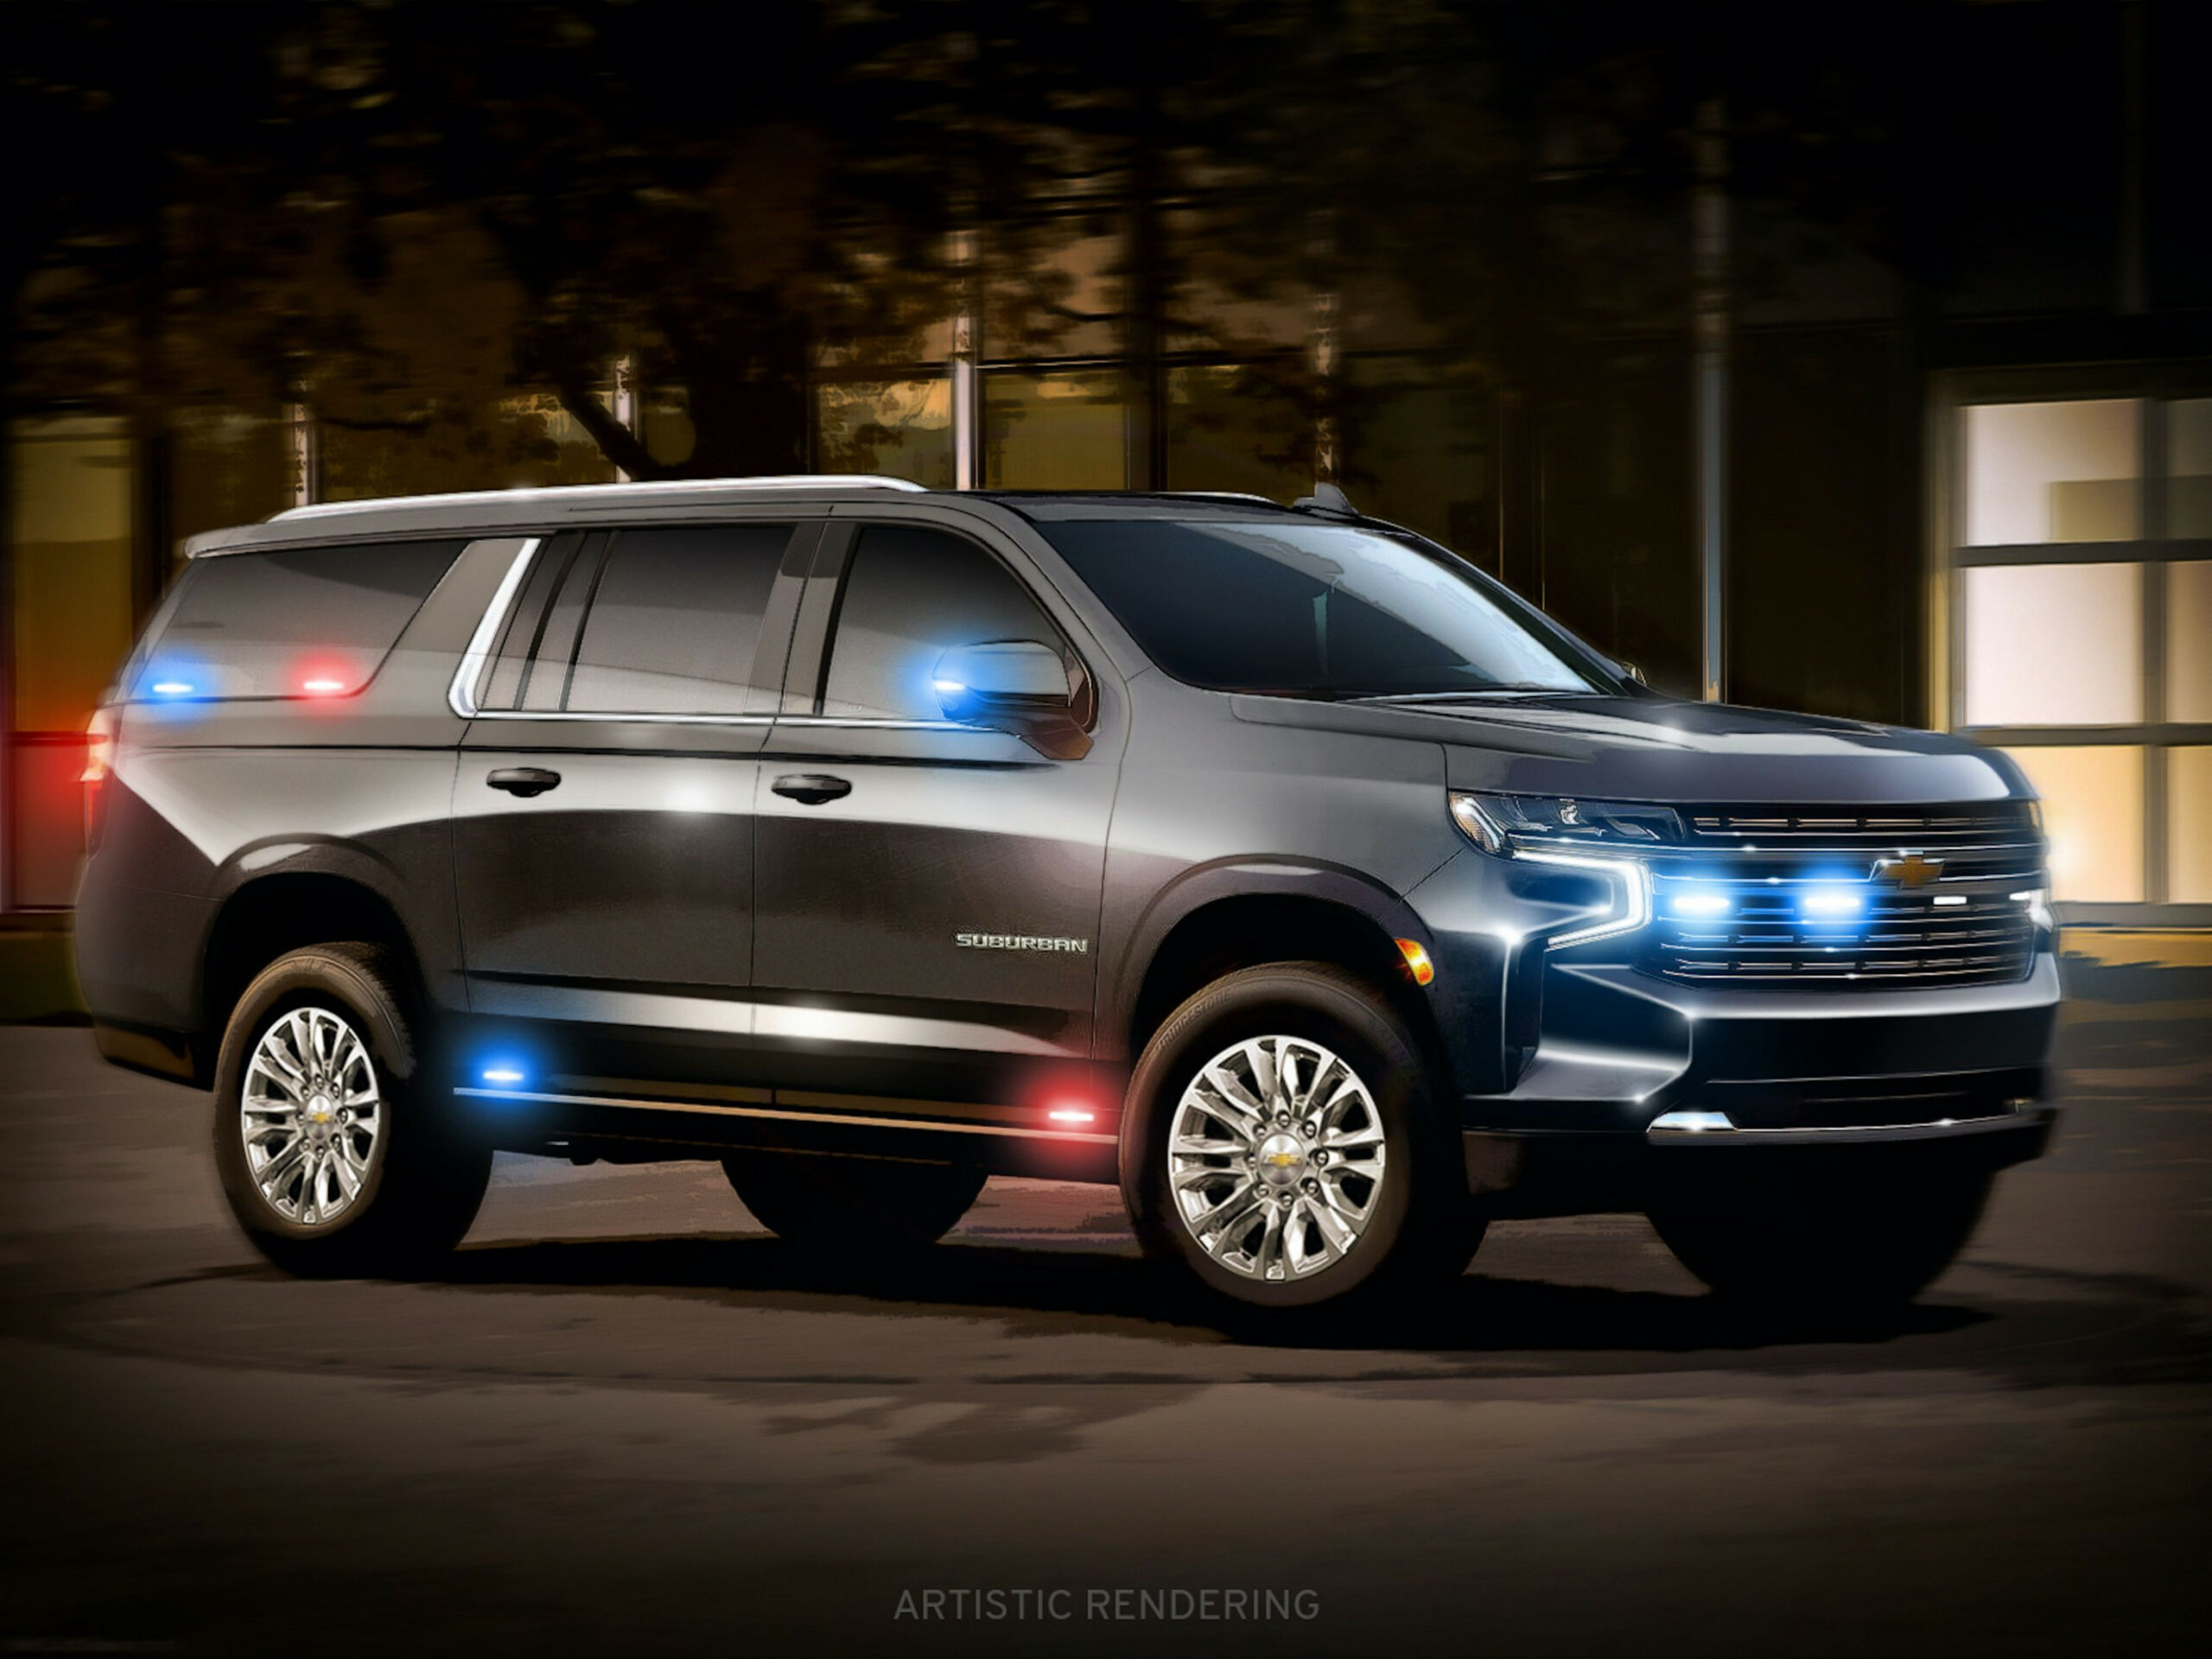 Chevy Suburban Hd Is Back But You Can't Have One When Will The 2023 Chevrolet Suburban Be Released